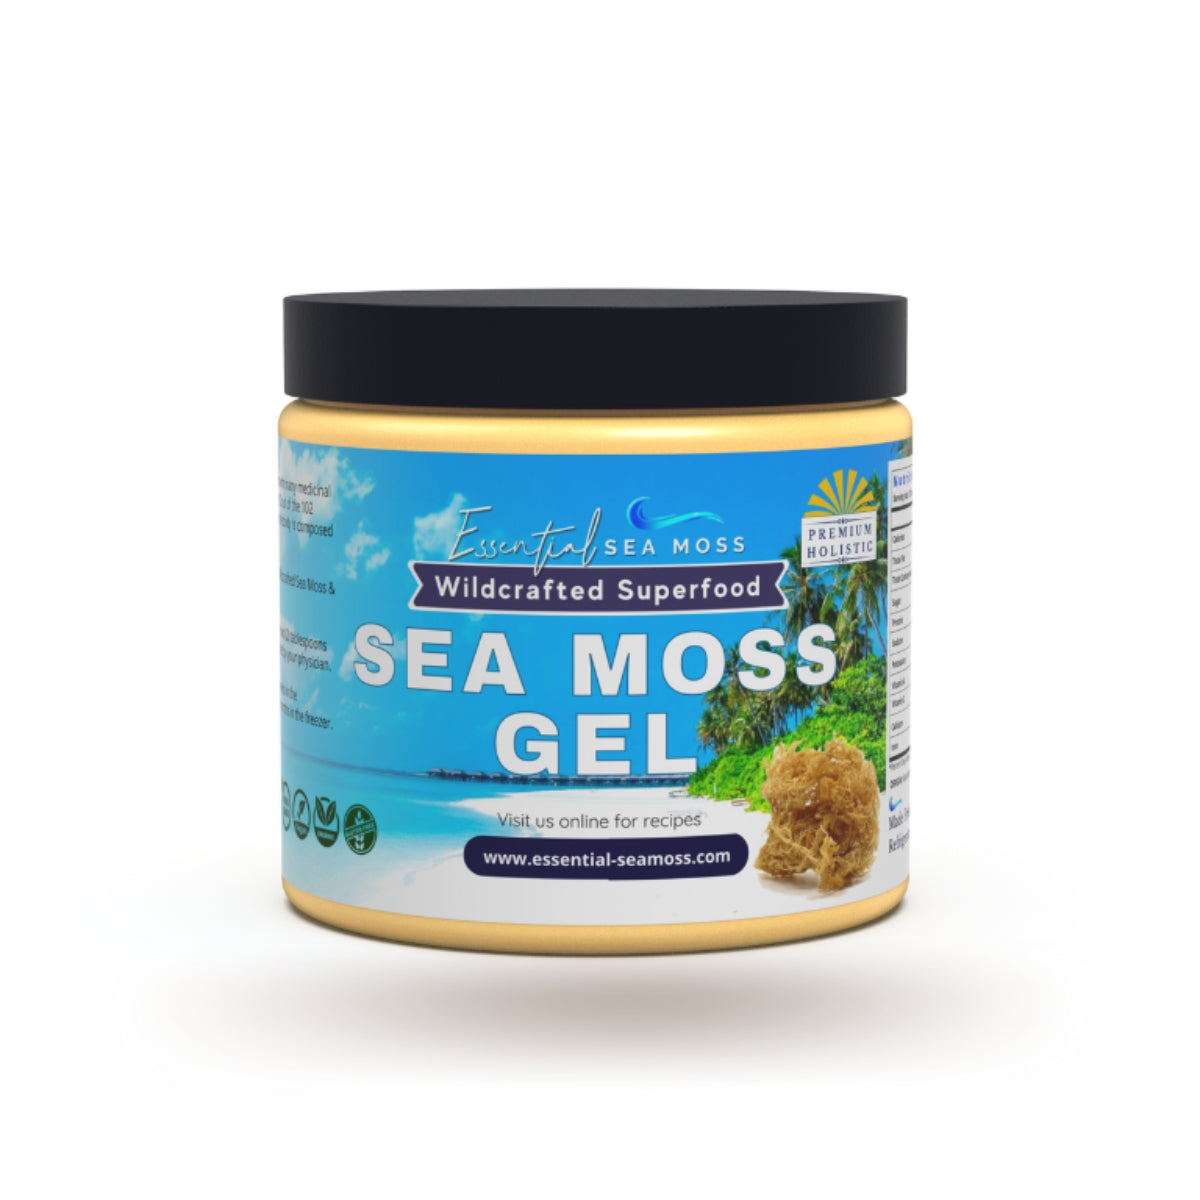 Unlock Wellness with Our Saint Lucian Sea Moss - The Ultimate Superfood